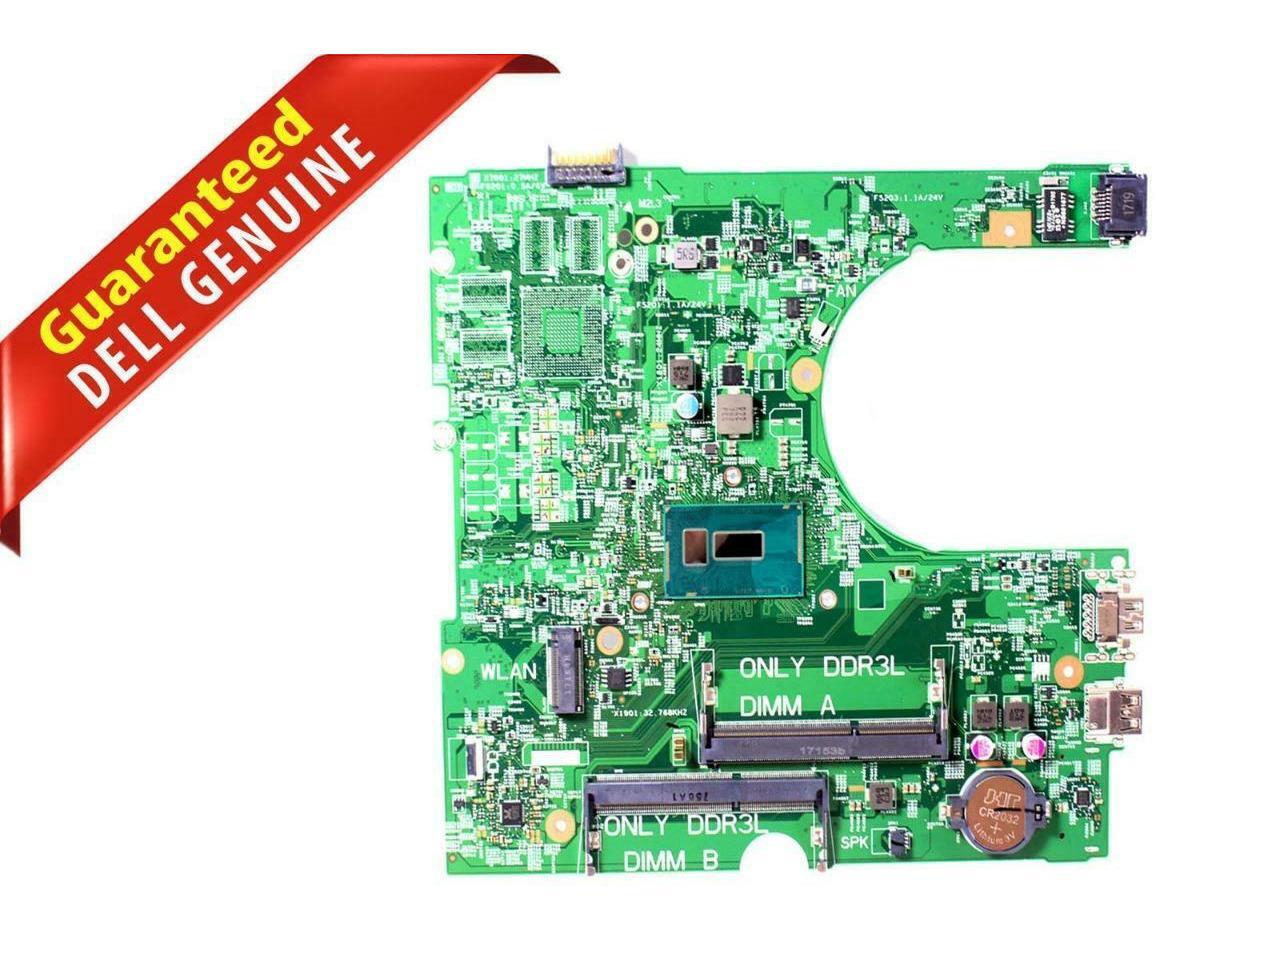 New Dell Inspiron 15 3000 3458 3558 Laptop Motherboard I5-5200U 2.2G